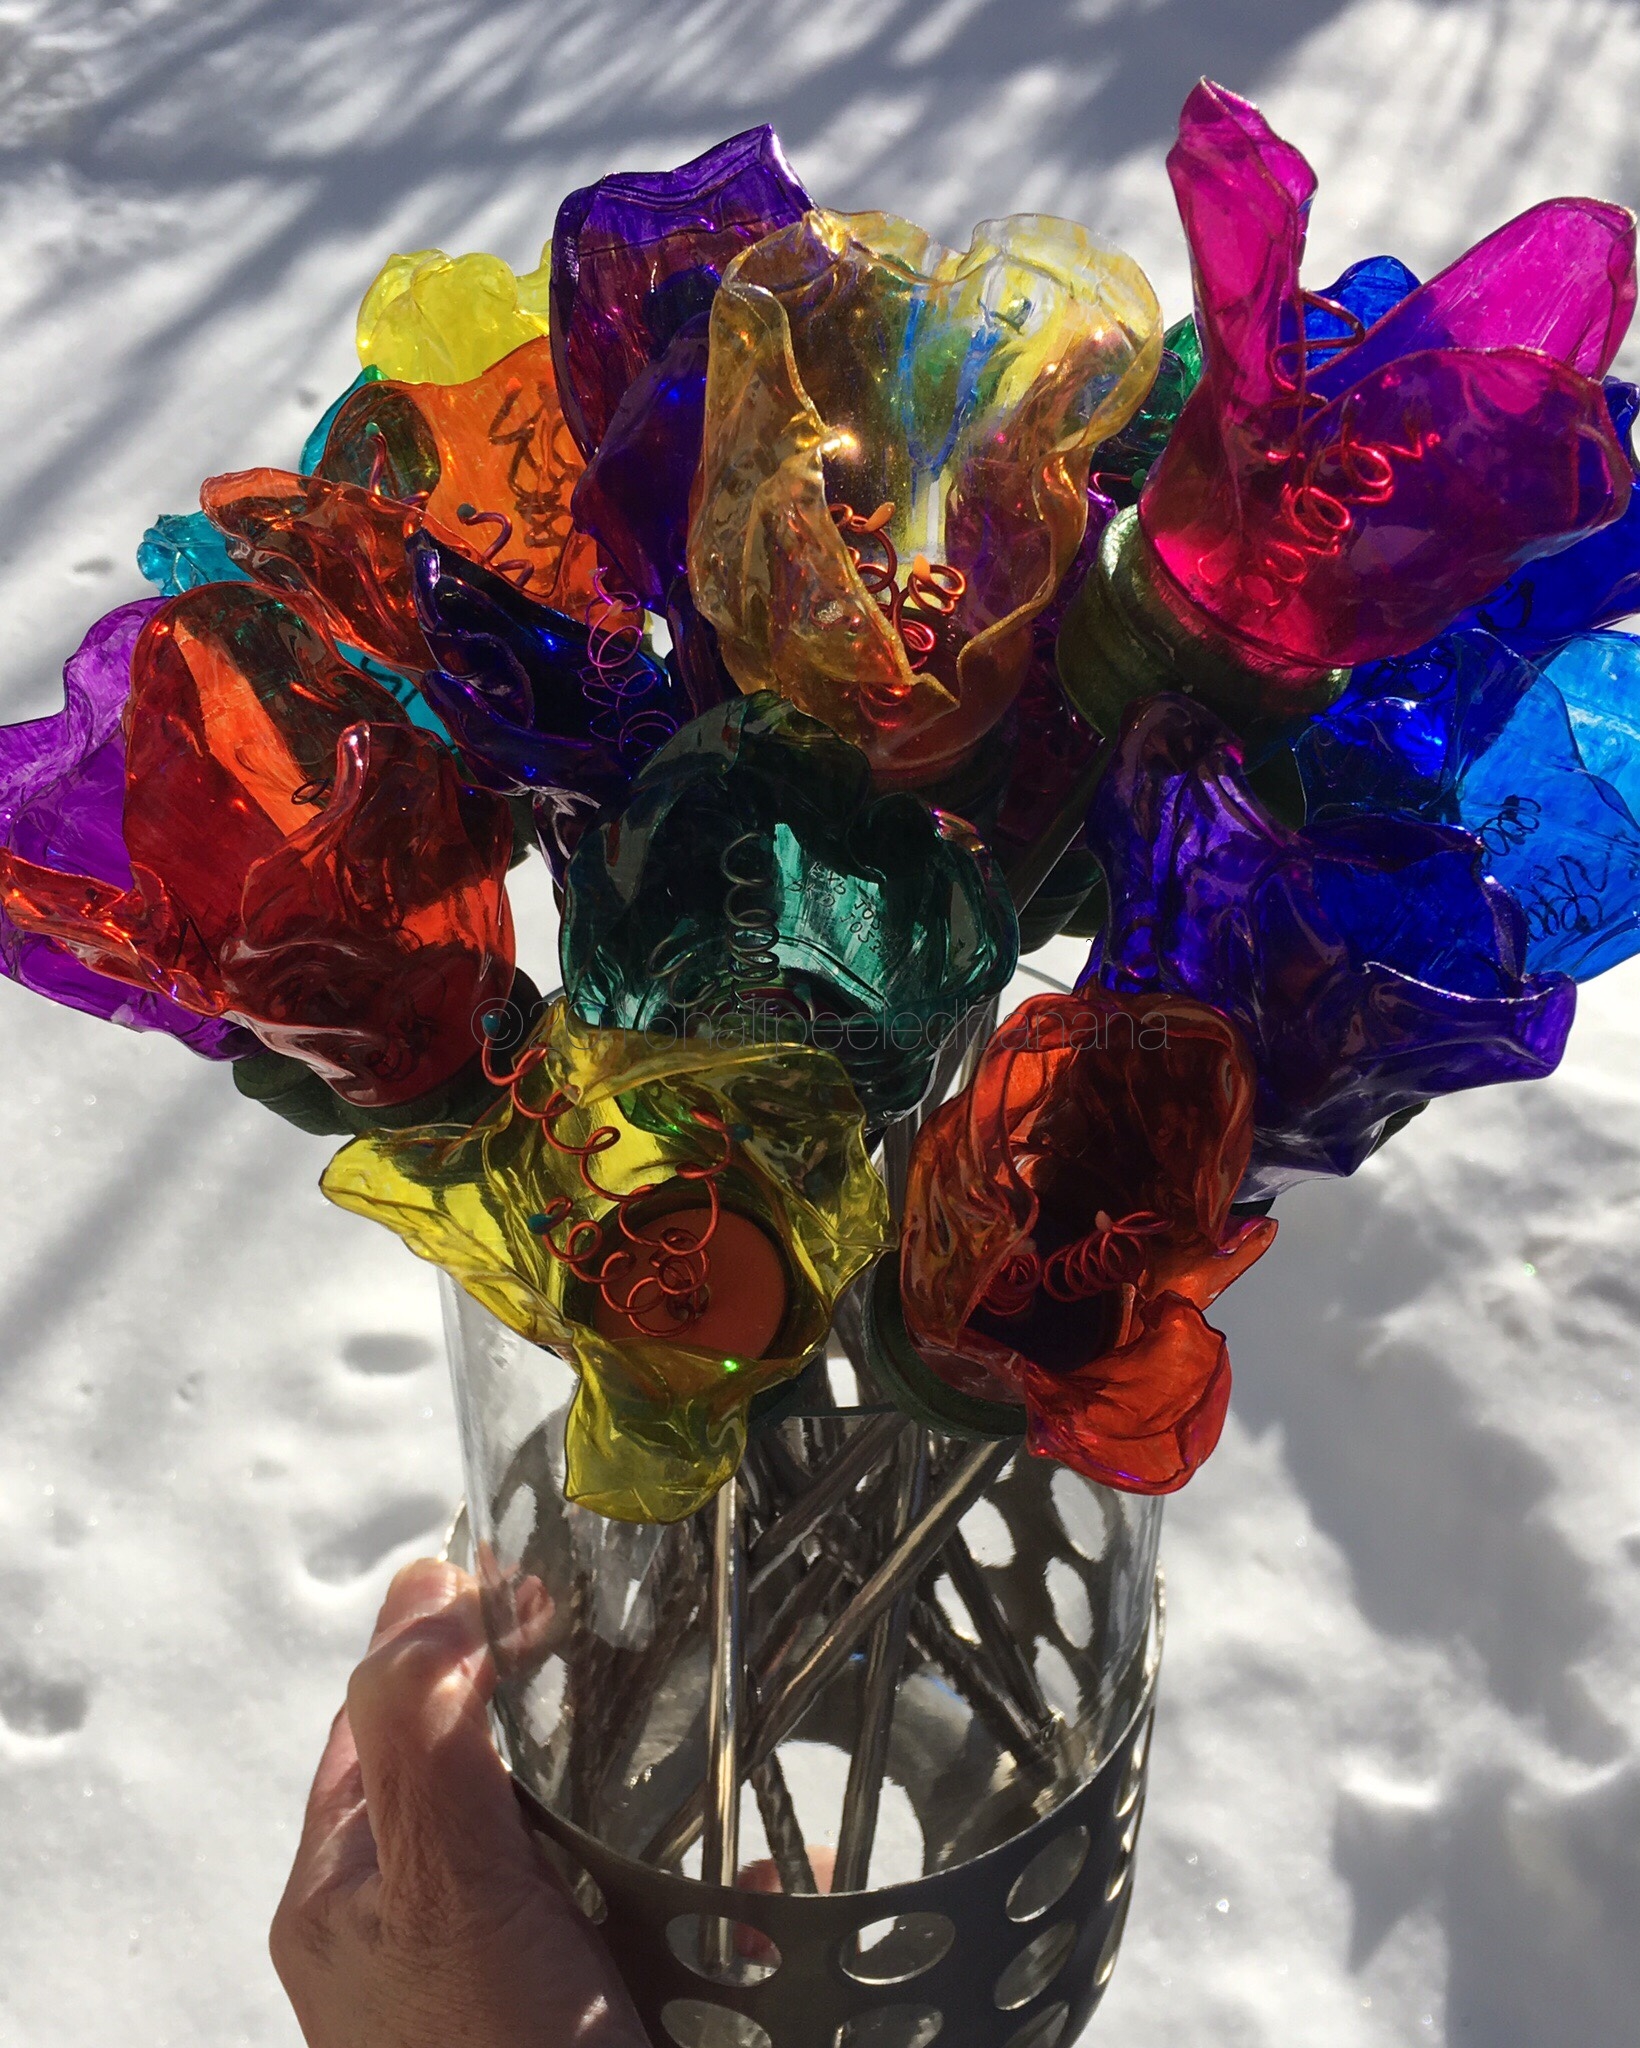 colorado snow dozen of upcycled water bottle bright flowers!!